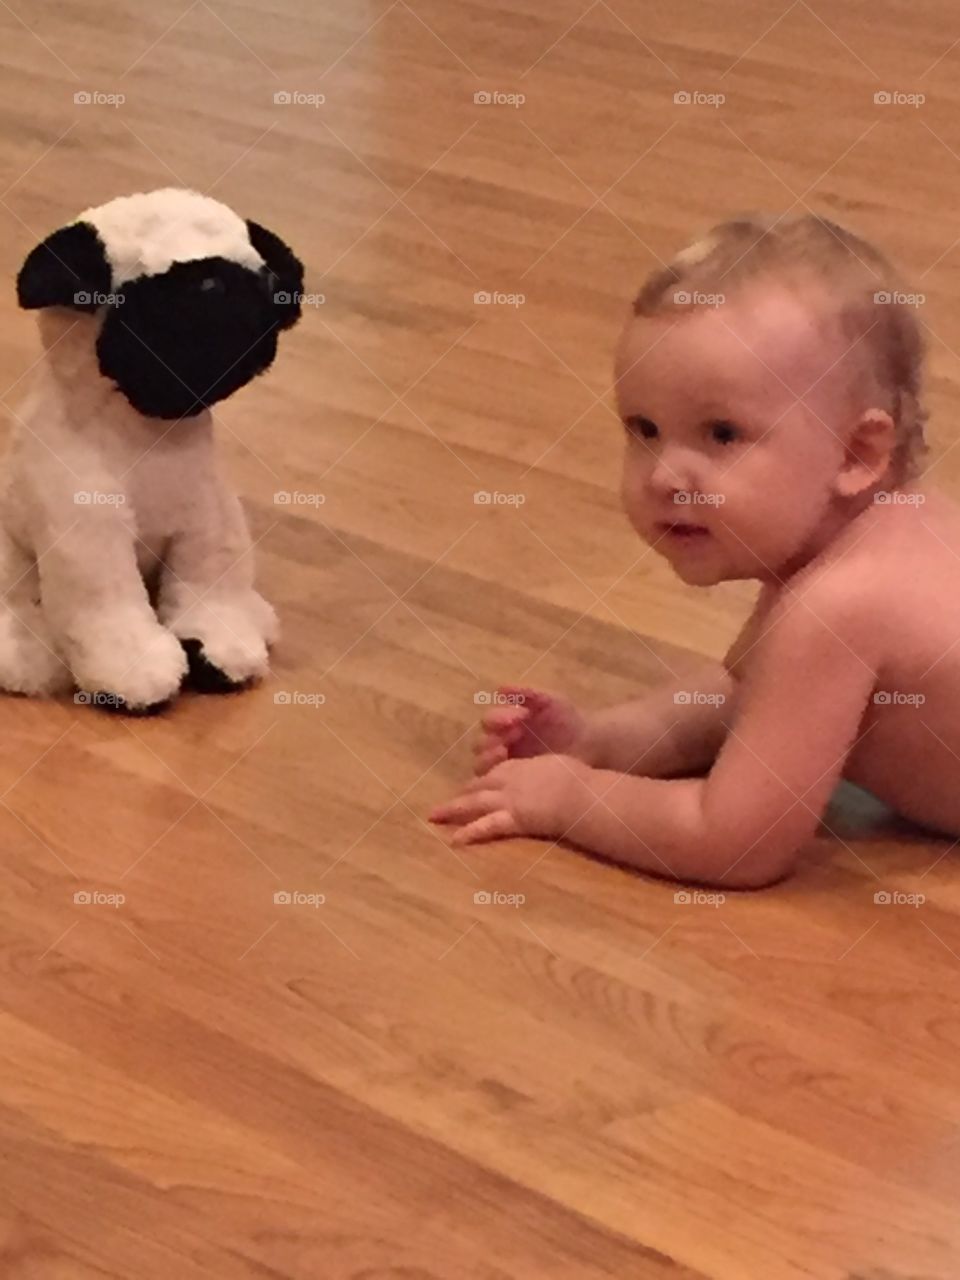 My grandson with his doggy